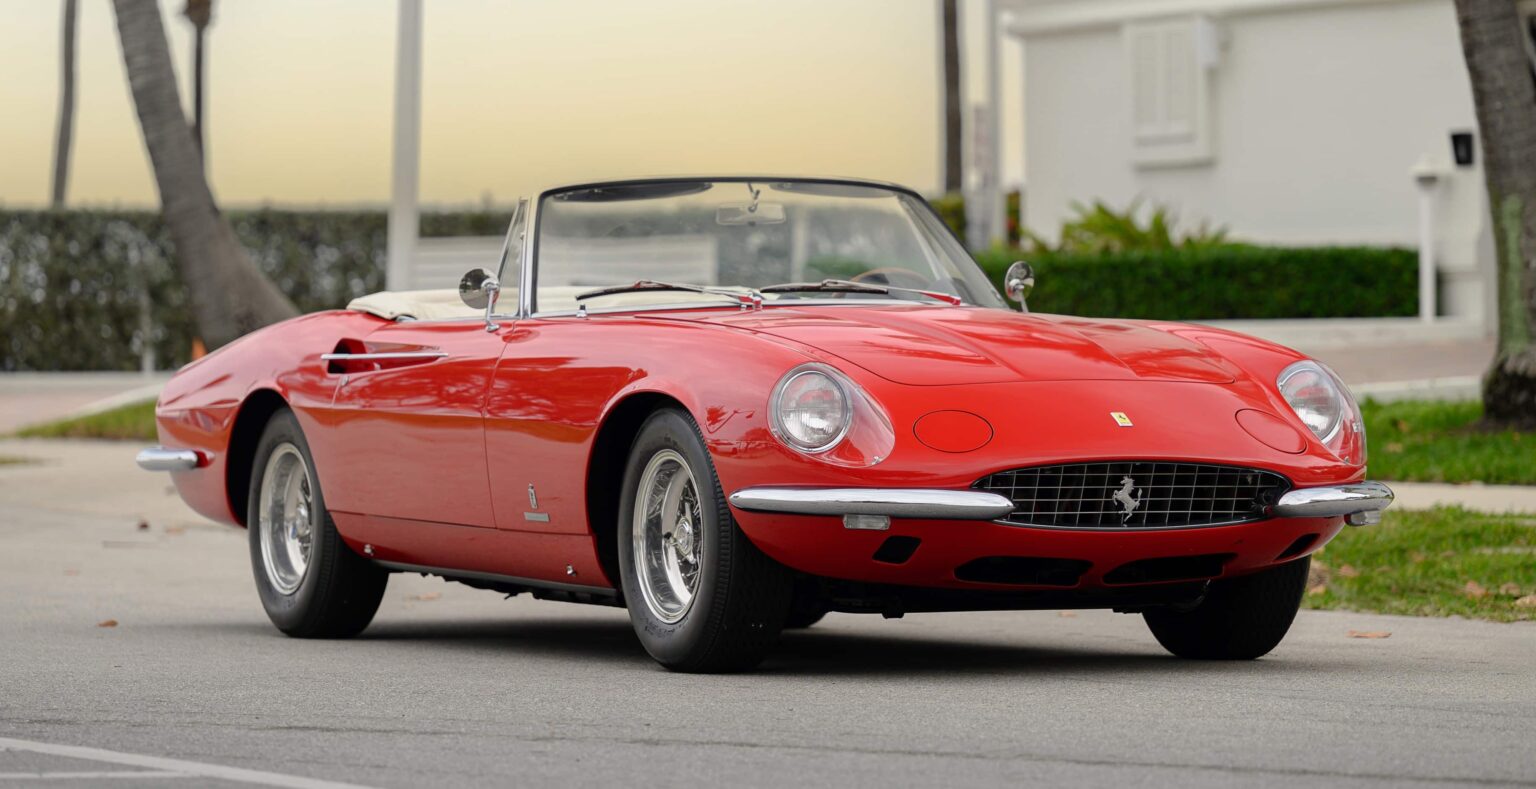 Rare Ferrari 365 California Spyder, one of only 14 worldwide, hits auction block at £3.1 million. With iconic design and top-notch performance, it's a coveted gem for collectors.